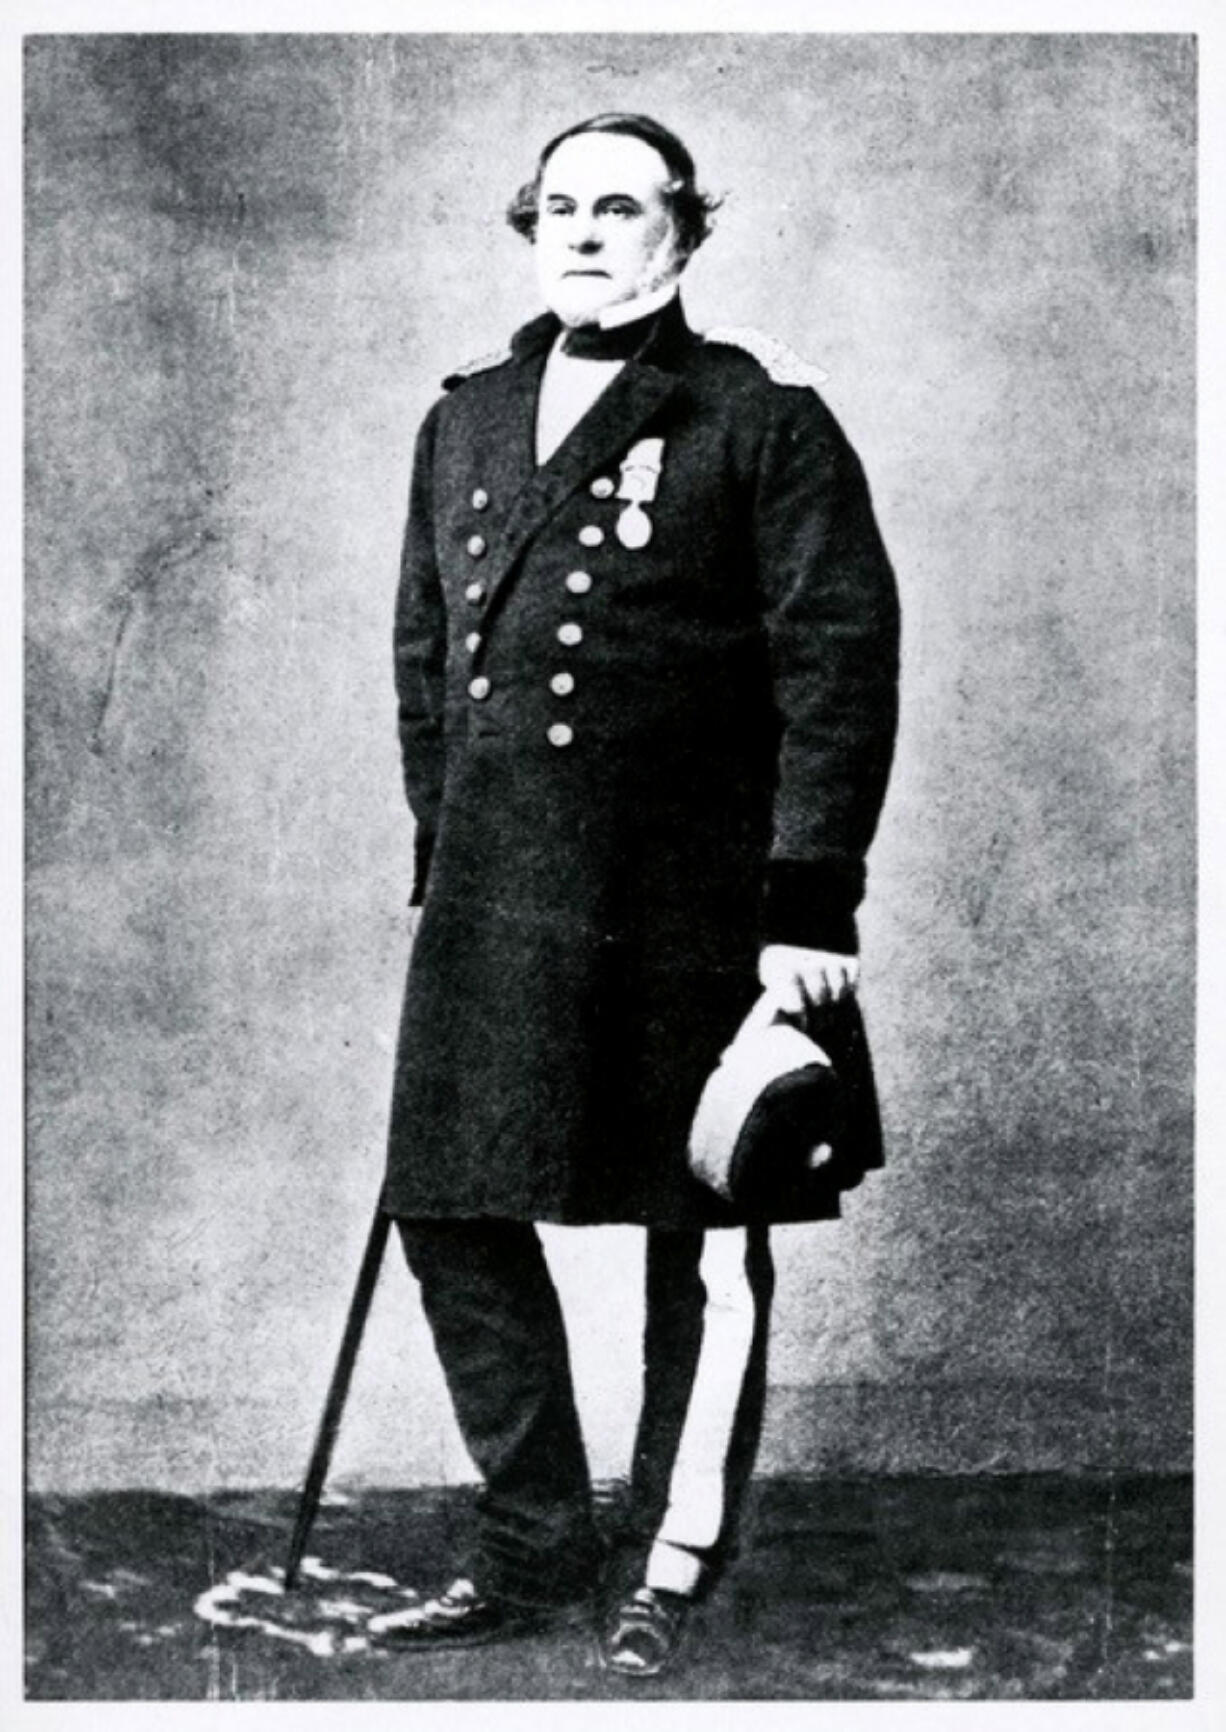 John McLoughlin met a 16-year-old James Douglas in 1819 when the North West Company employed them and mentored him in the fur trade. Two decades later, Douglas became the assistant to McLoughlin, the Hudson Bay Company's chief factor at Fort Vancouver. In 1863, Queen Victoria knighted Douglas for his work in colonizing British Columbia.